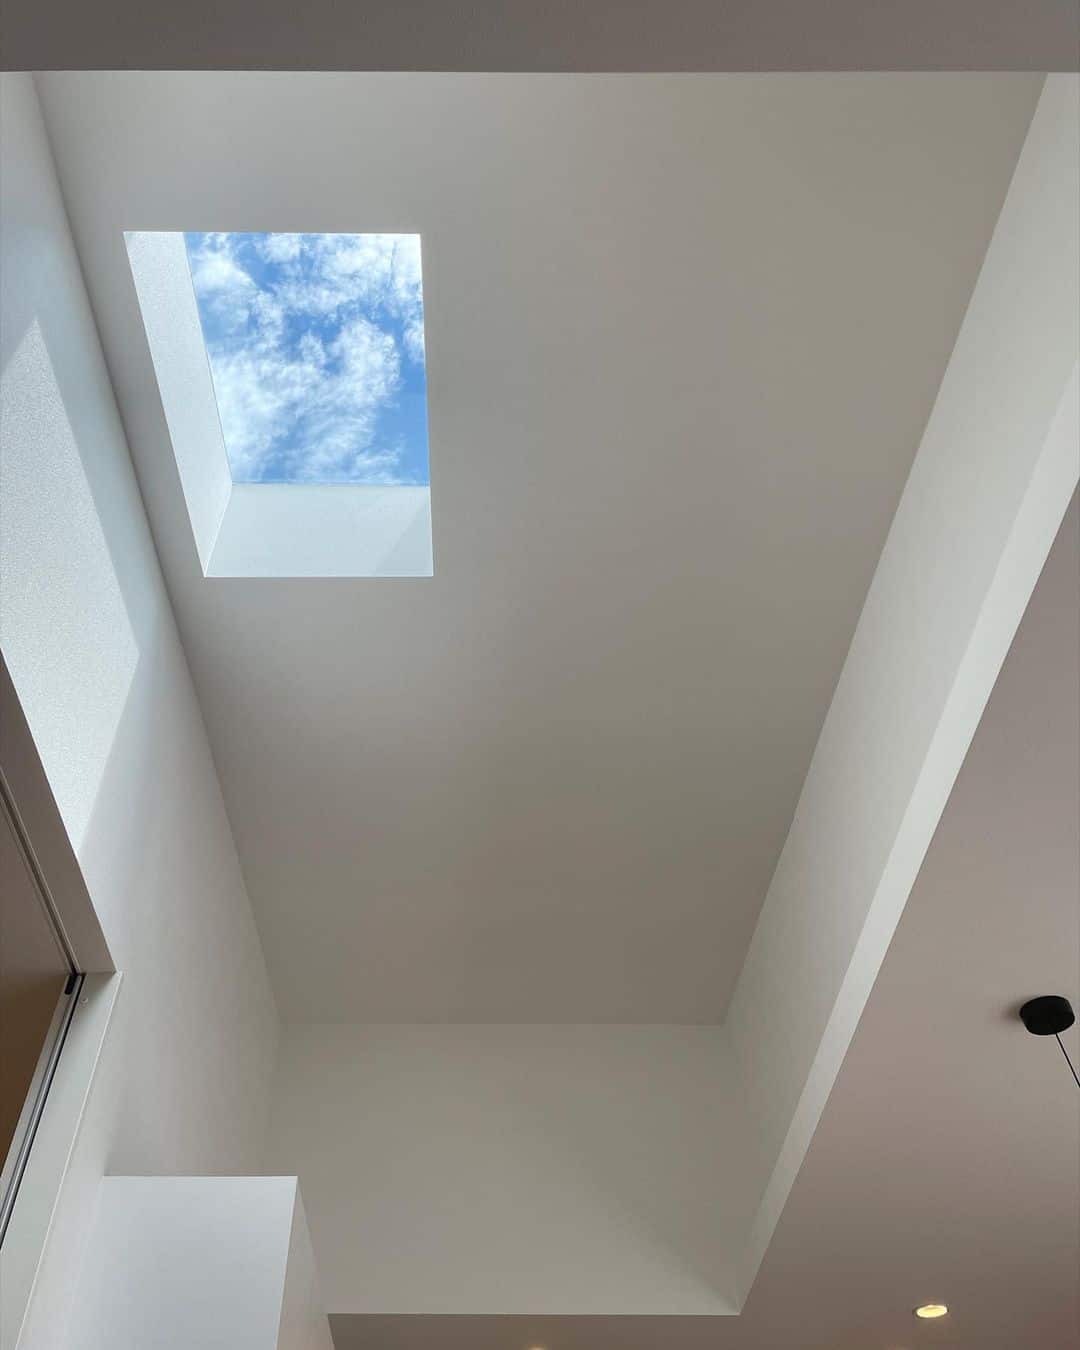 What are the Factors that can Affect the Cost of Skylight Window Repair and Replacement?